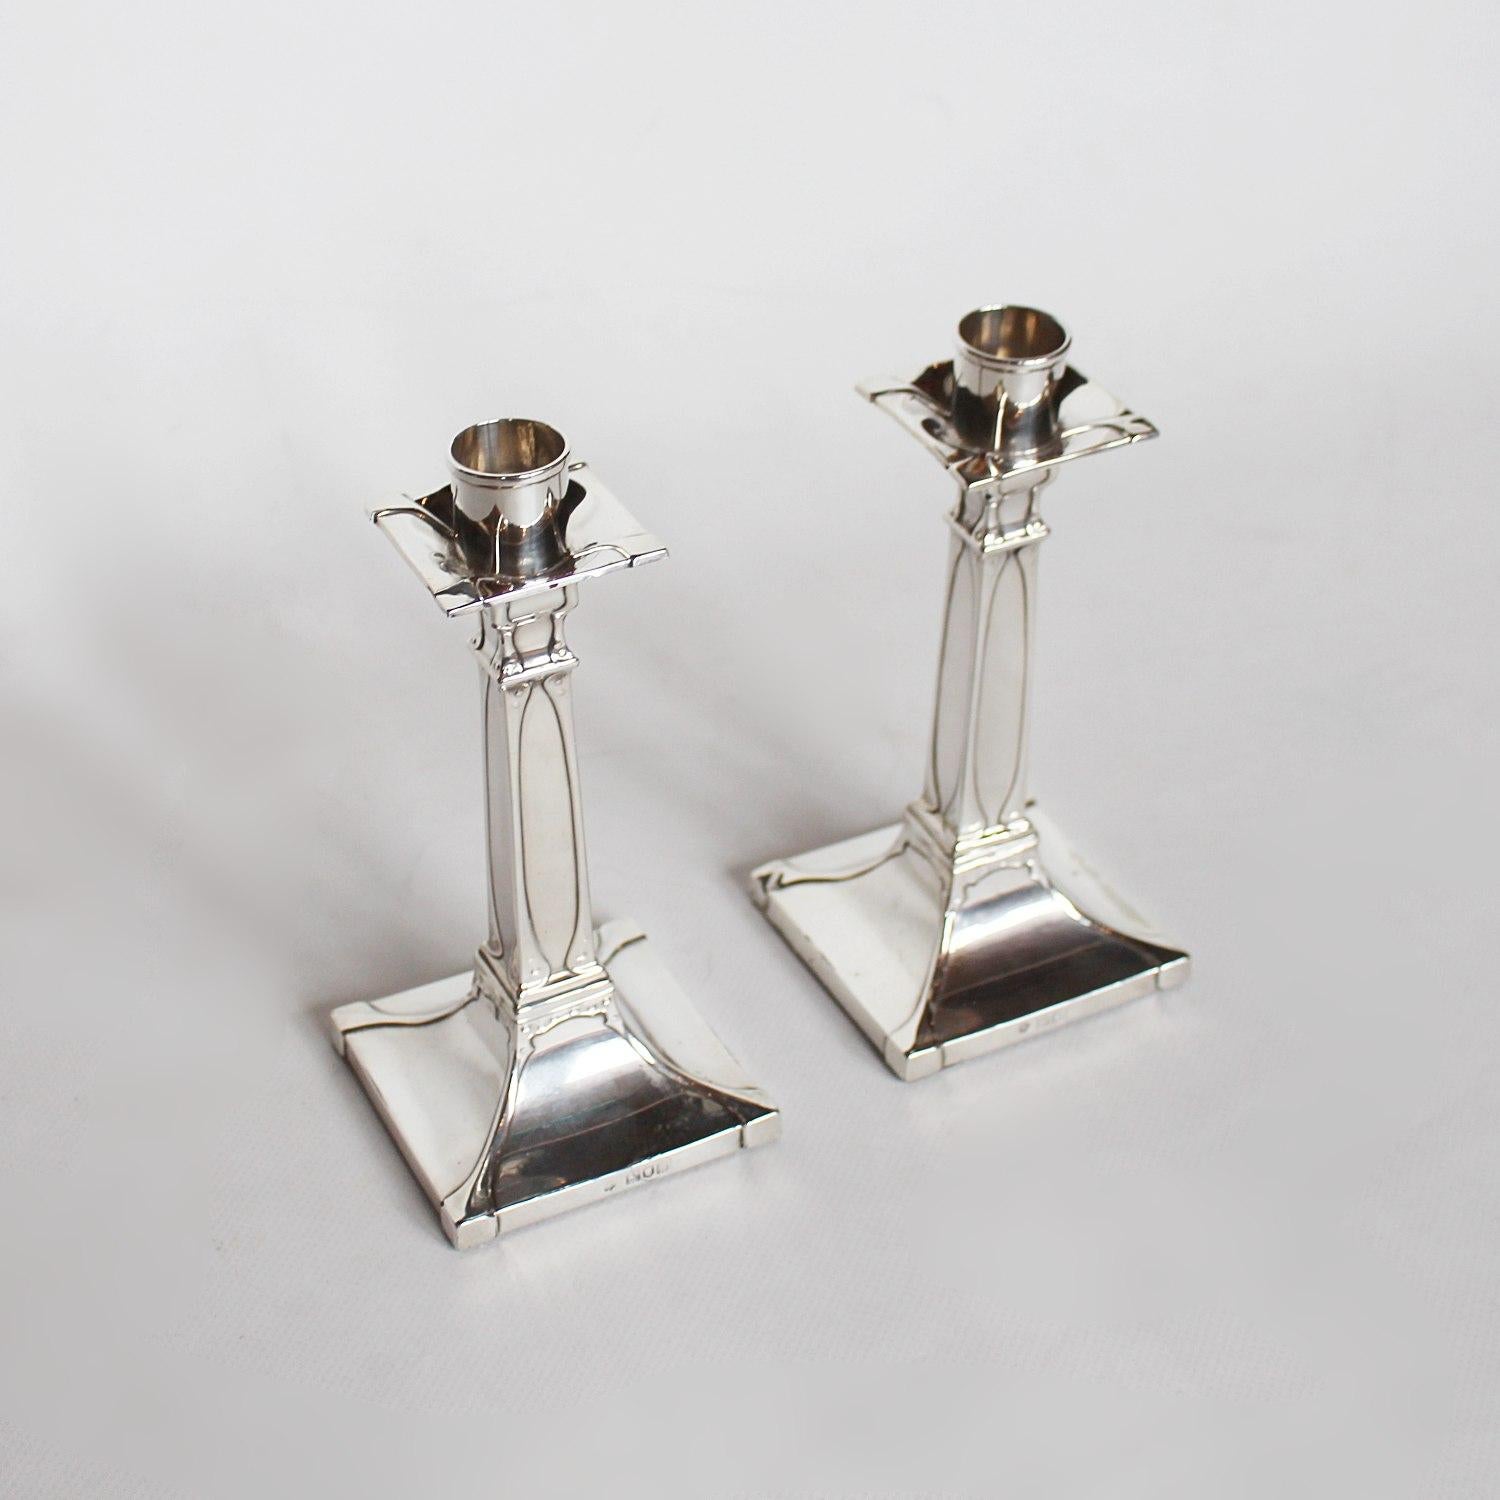 A pair of Art Nouveau silver candlesticks with tapering square stems. 

Maker: William Hutton & Sons Ltd

Date: dated London, 1909.
 